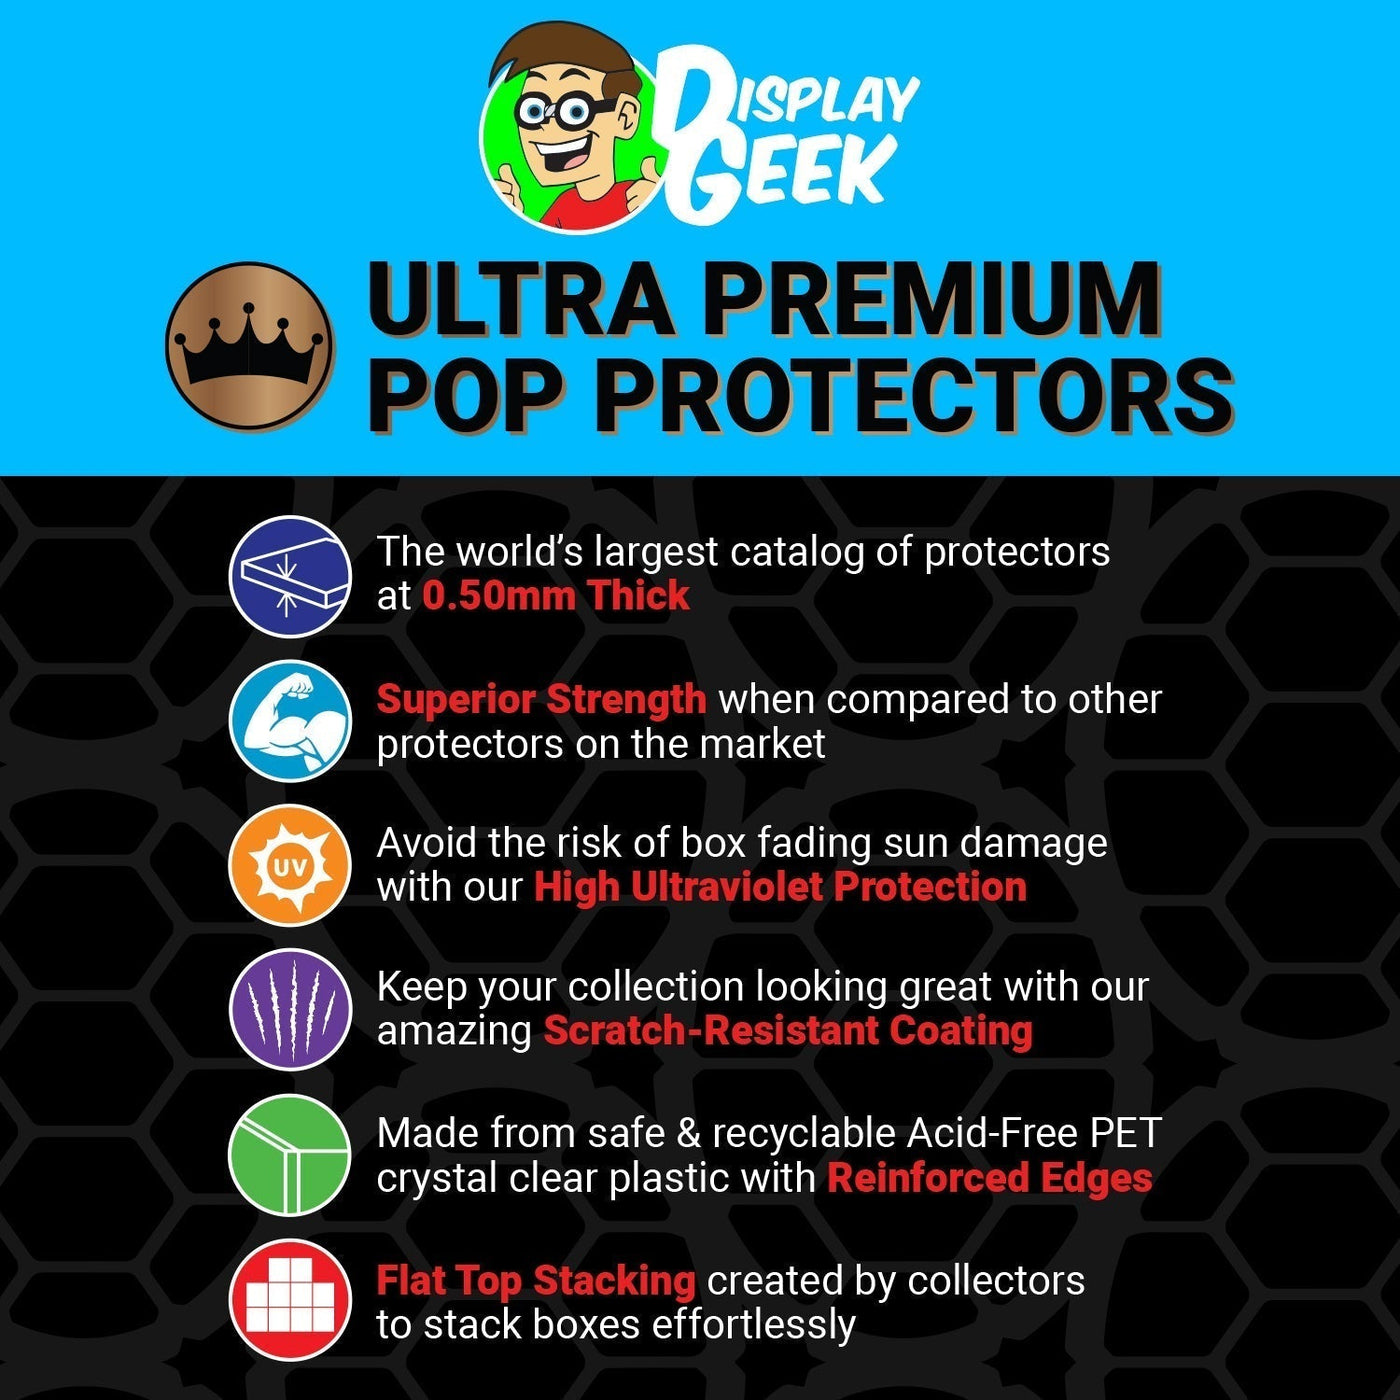 Pop Protector for Captain America FunKon #01 Funko Pop Die-Cast Outer Box on The Protector Guide App by Display Geek